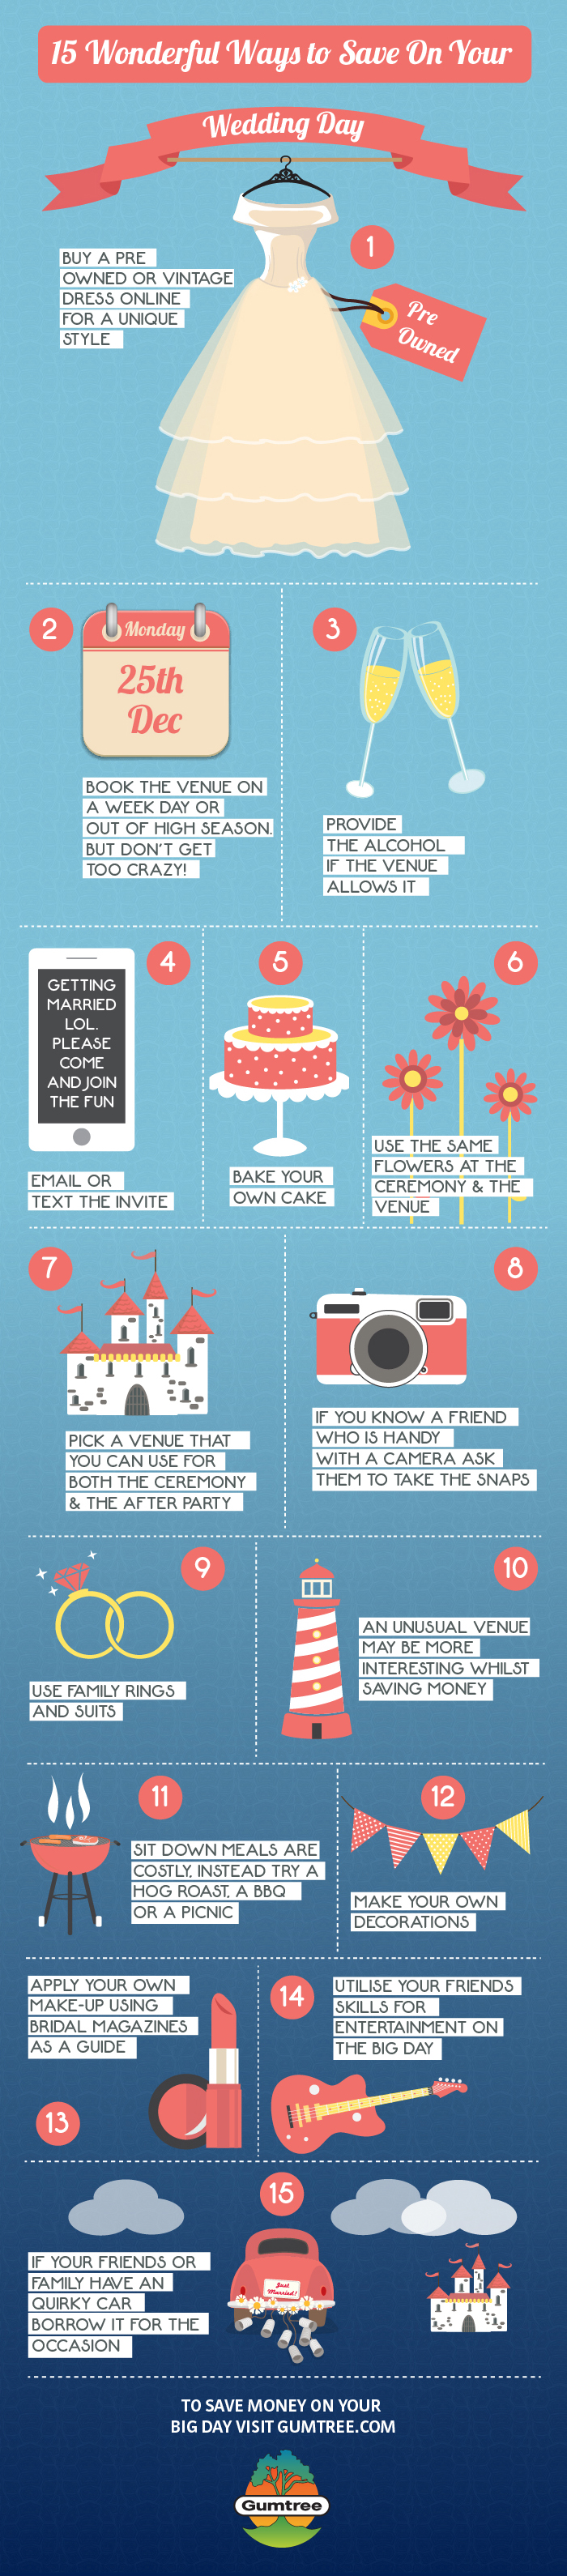 15 Money Saving Tips For Your Wedding Day